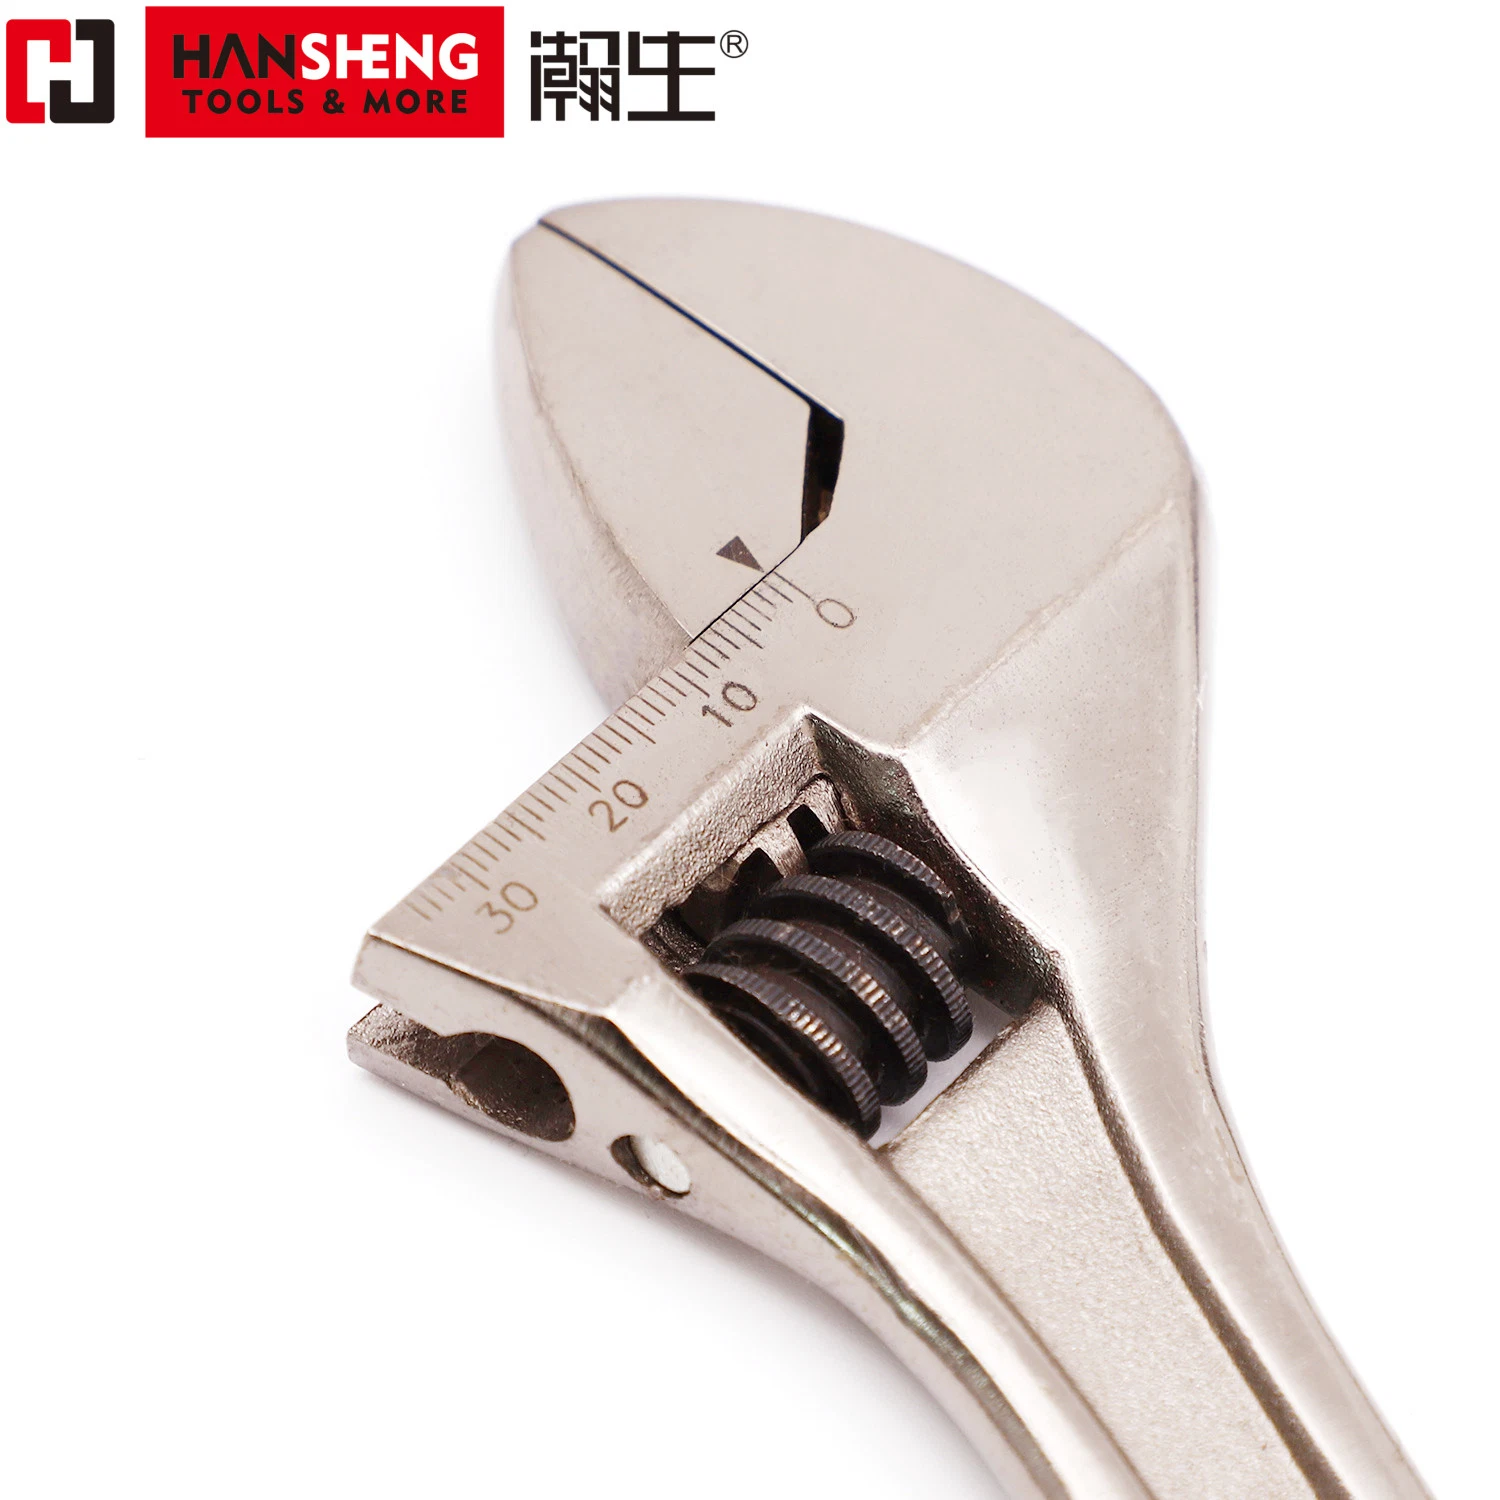 Professional Hand Tool, Made of CRV, High Carbon Steel, Chrome Plated, Hardware Tools, Adjustable Wrench